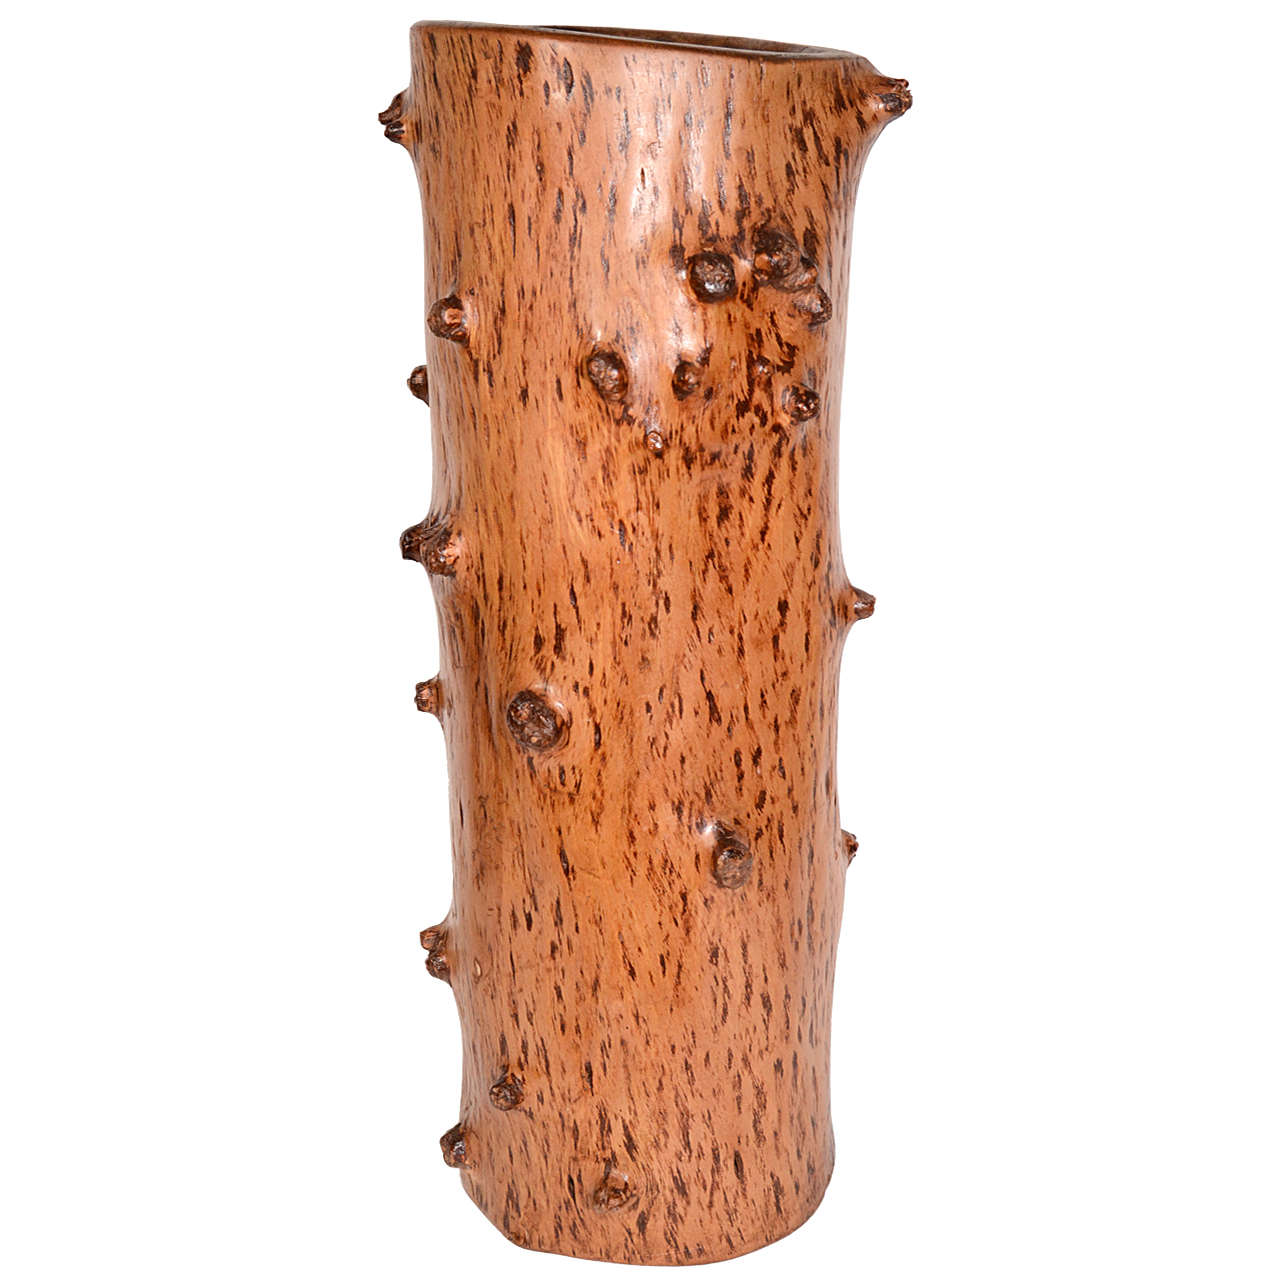 Tall Umbrella Stand made of Vintage Spruce Tree Trunk